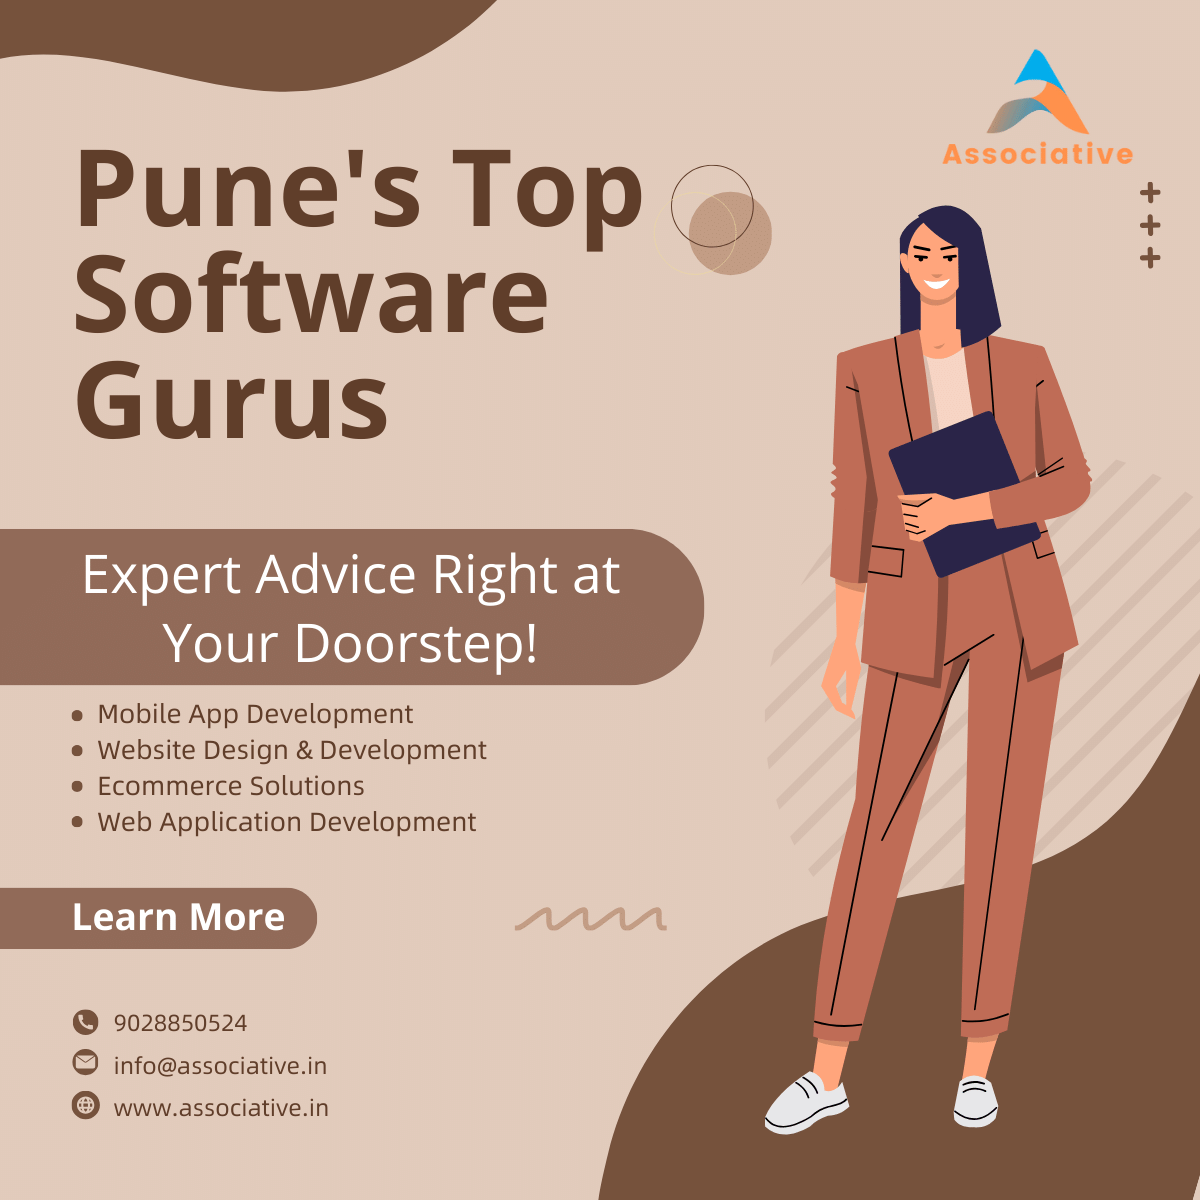 Pune's Top Software Gurus: Expert Advice Right at Your Doorstep!